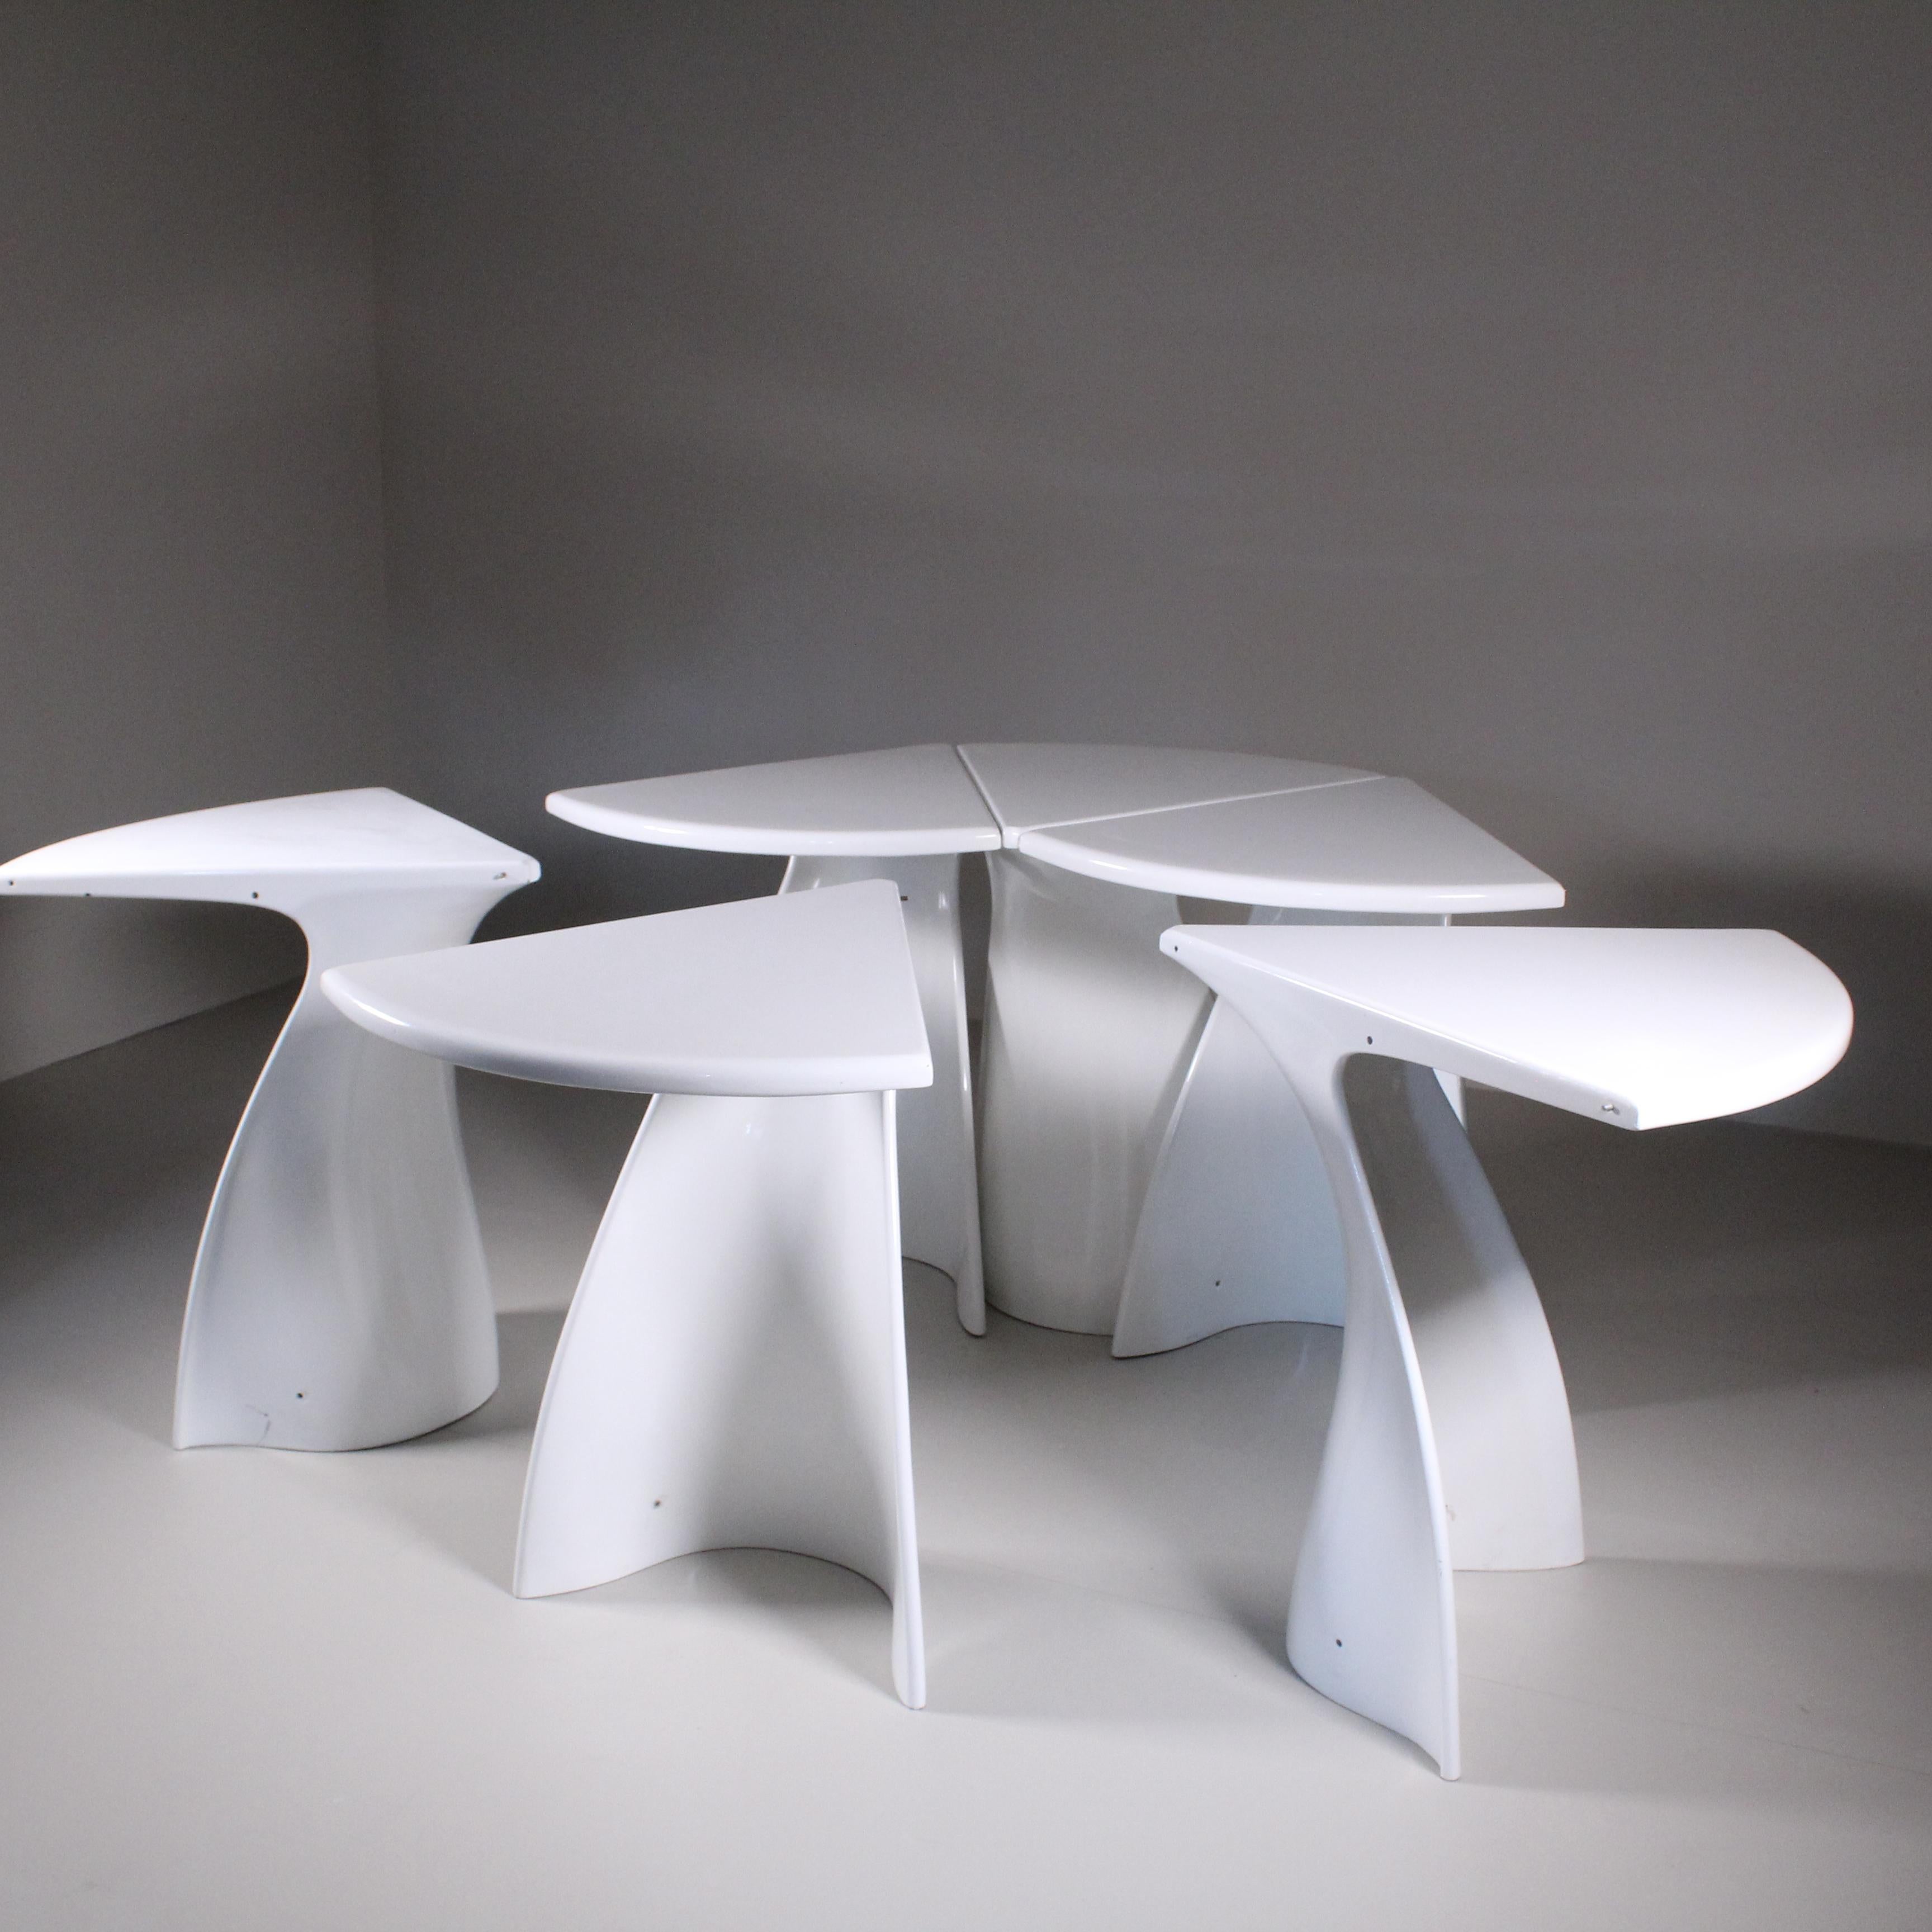 The strength of this table is its modularity. Fabio Lenci designed the table so that its sections can be easily adapted and combined according to the needs of the space and the user. This versatility allows the table to adapt to different